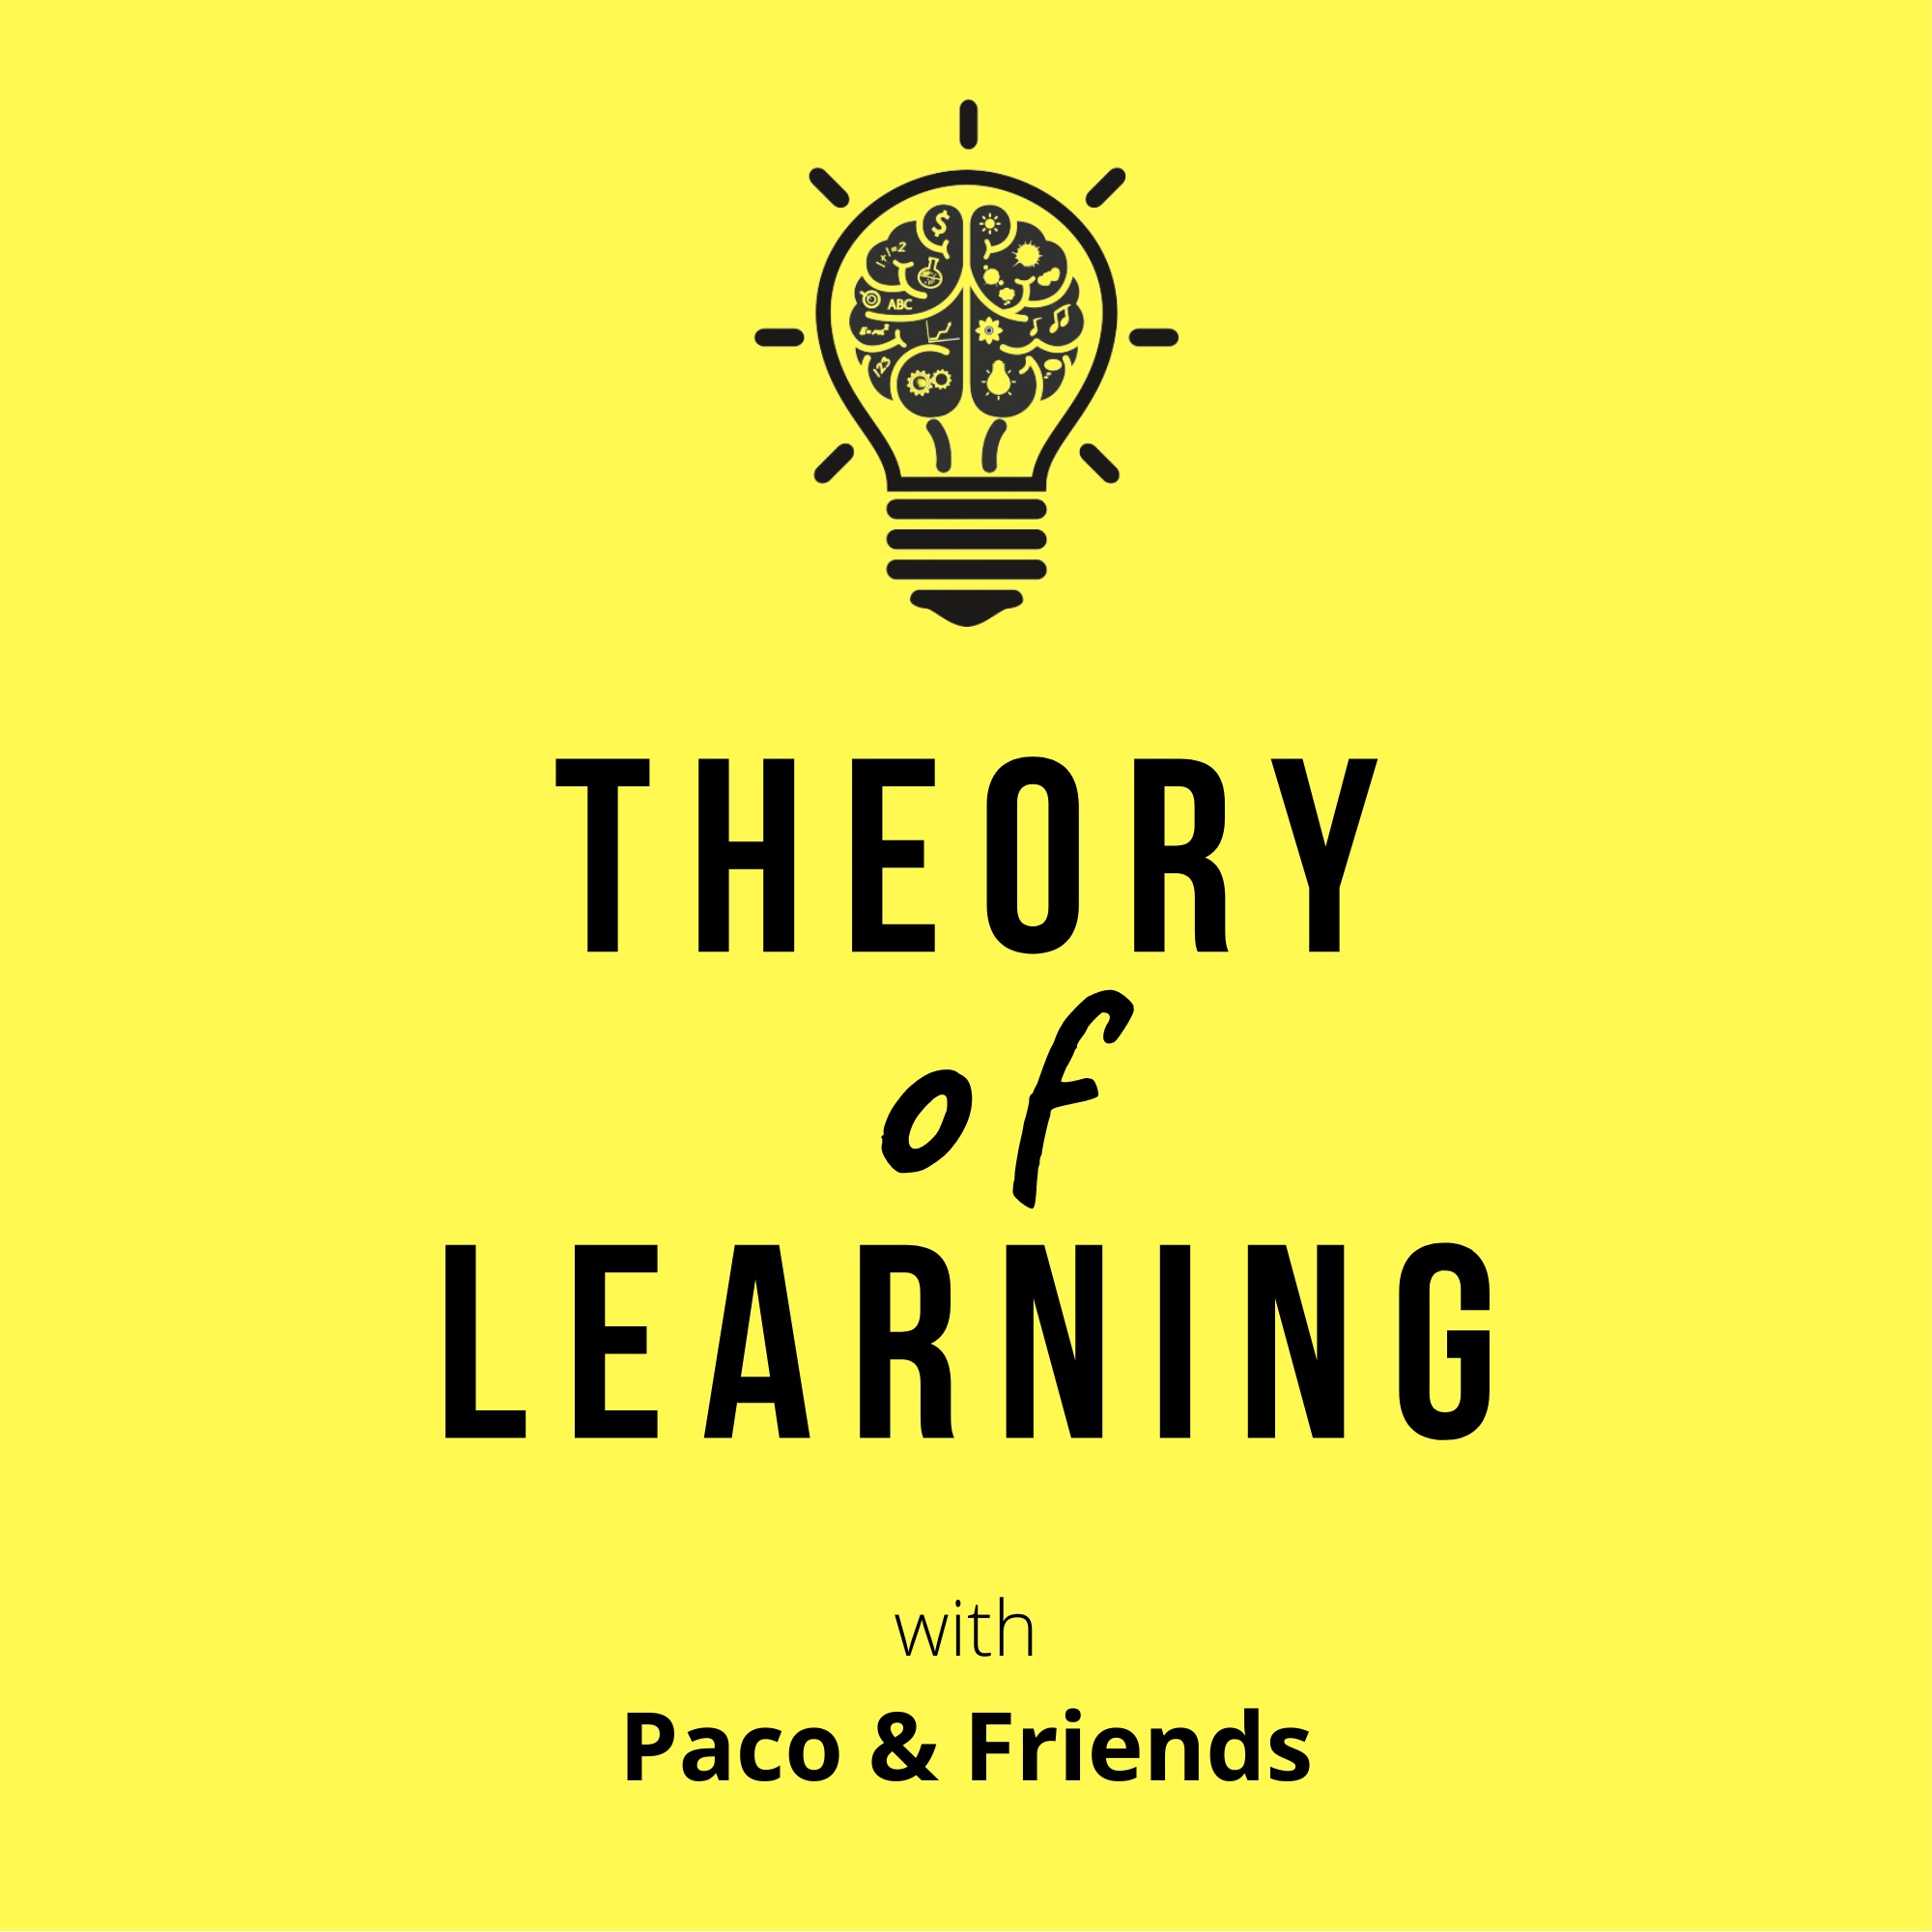 Introducing Theory of Learning with Paco and Friends